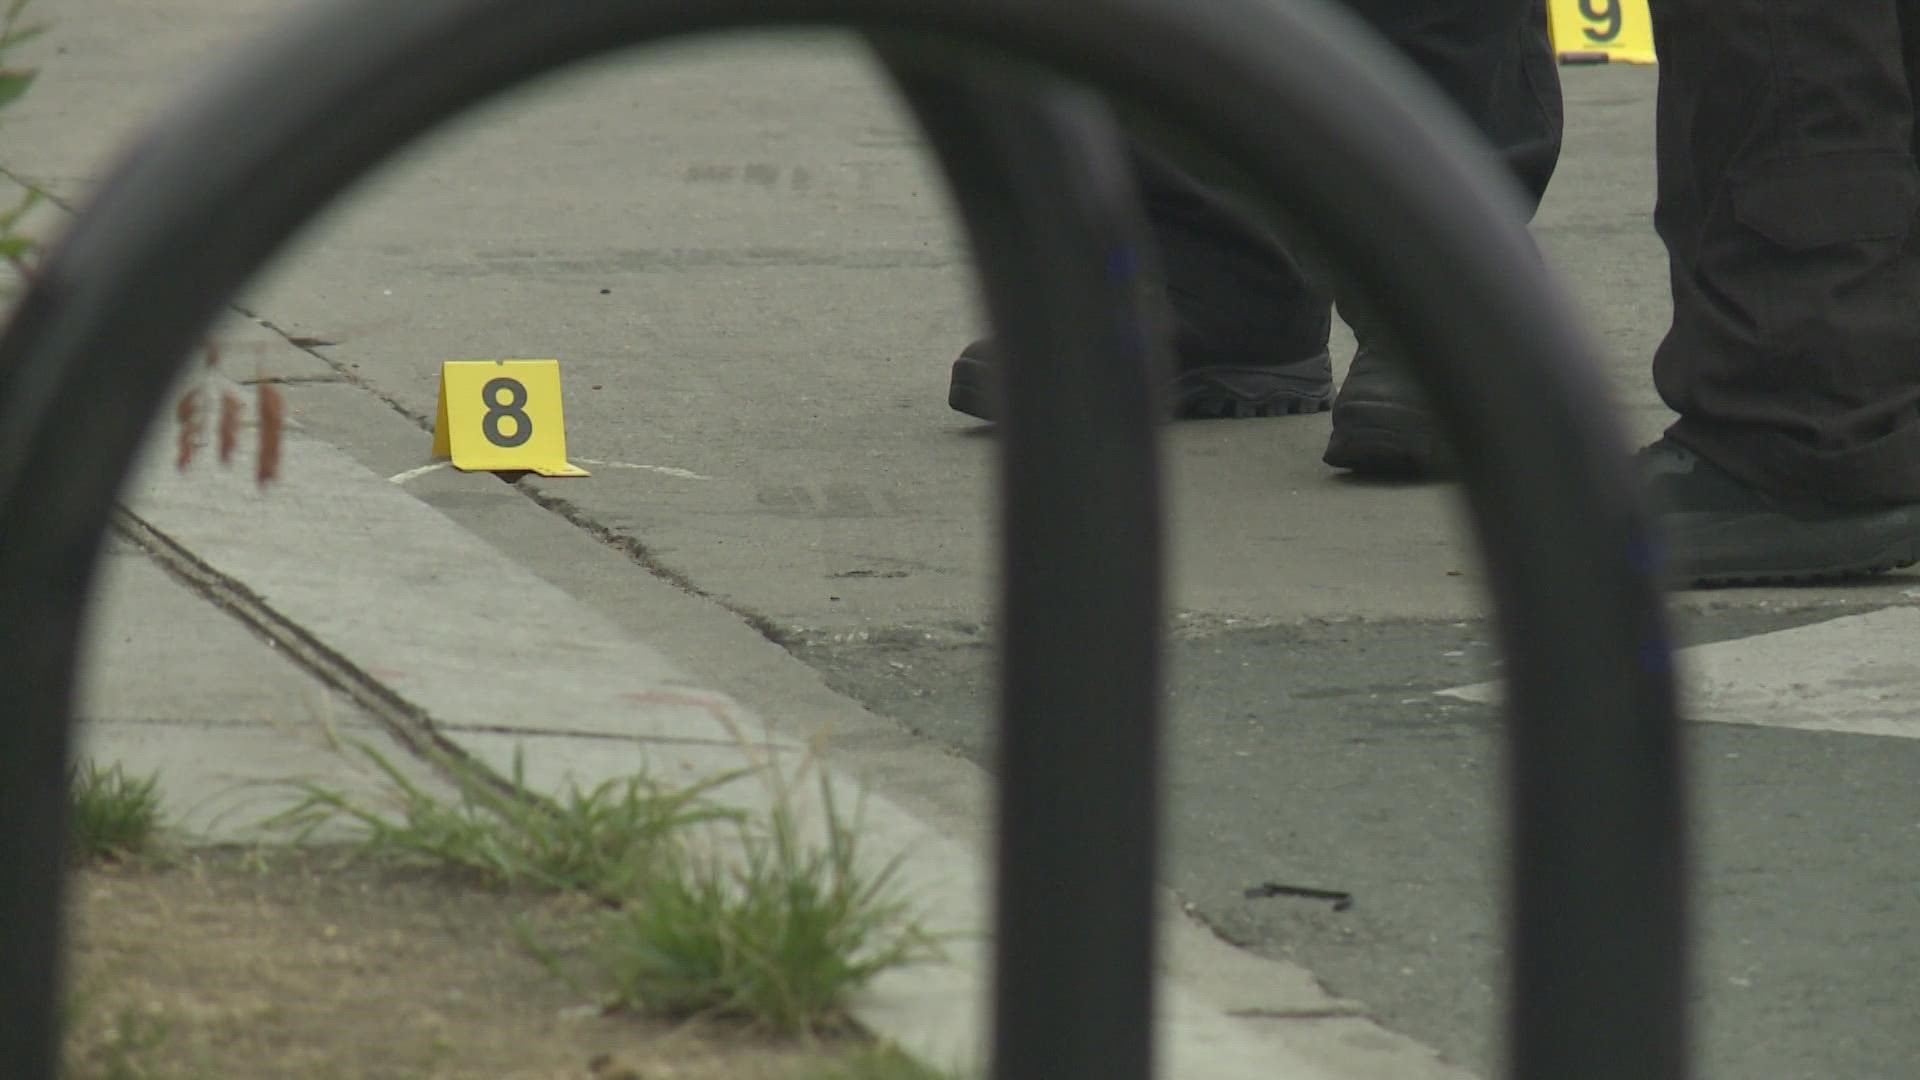 Two men and a woman were all shot around 11:45 a.m. nearby Mart Liquor store, in the same area where a six-year-old girl was shot and killed last year.